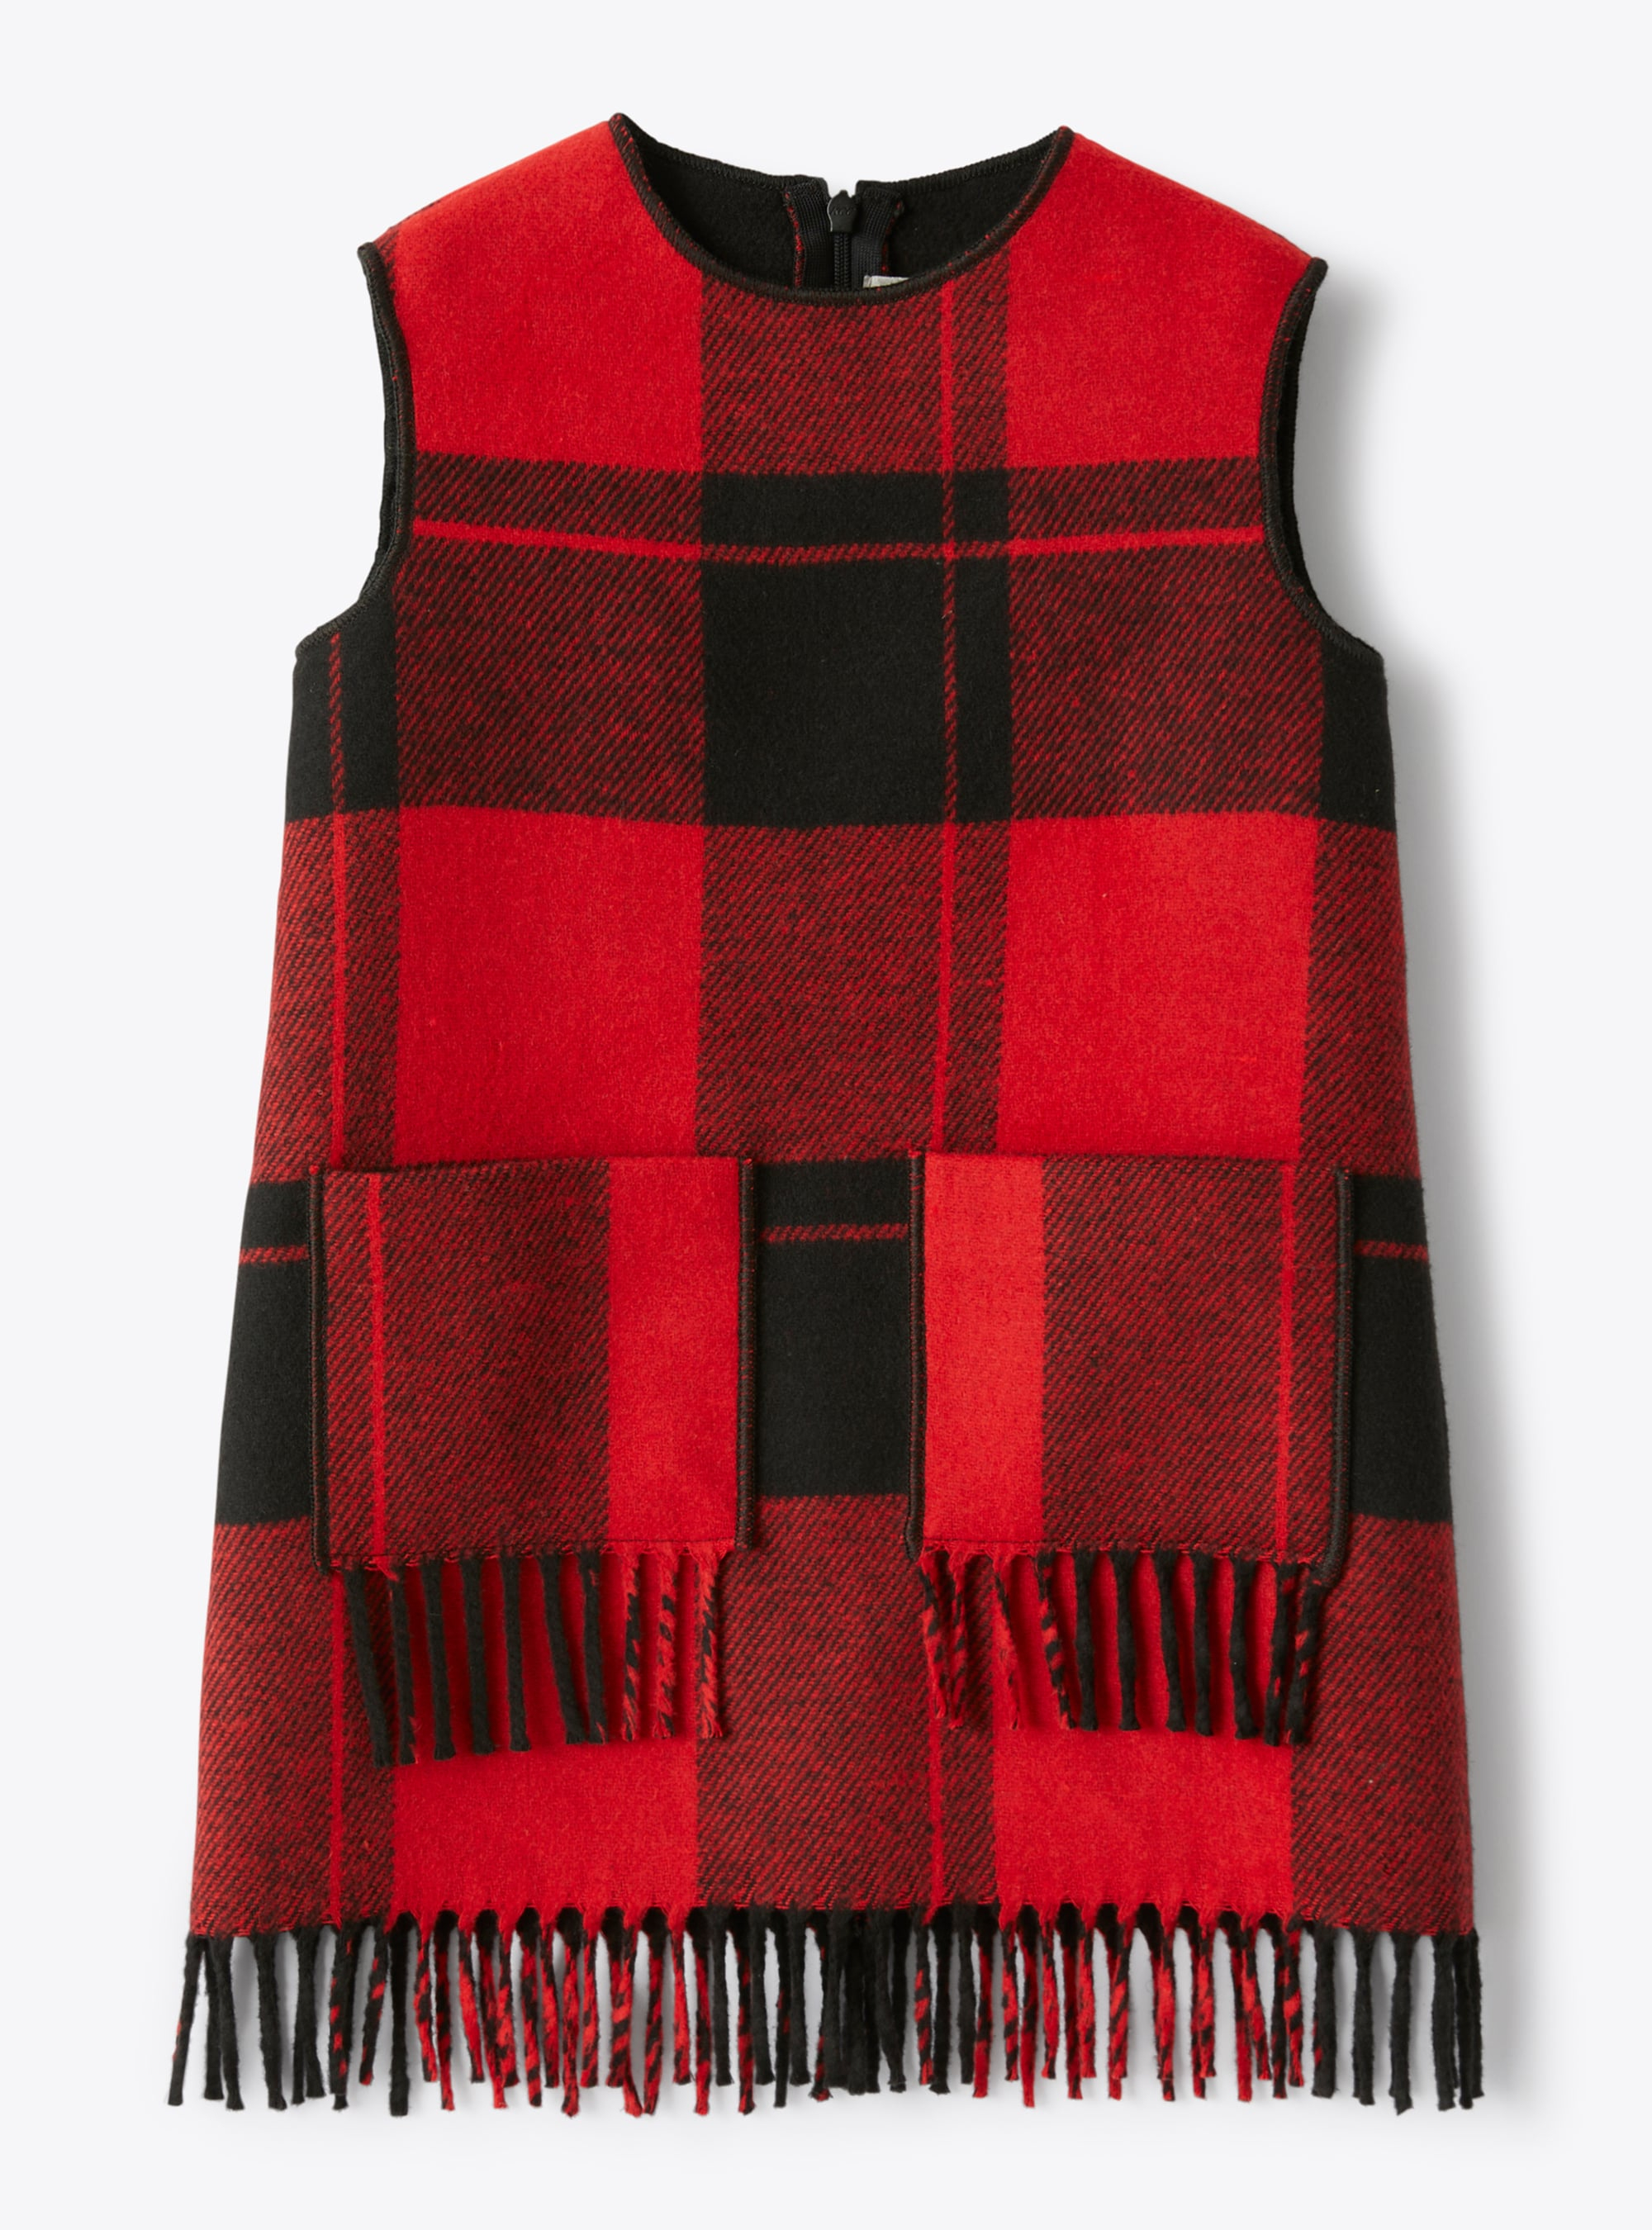 Sleeveless dress in a checked cloth - Dresses - Il Gufo